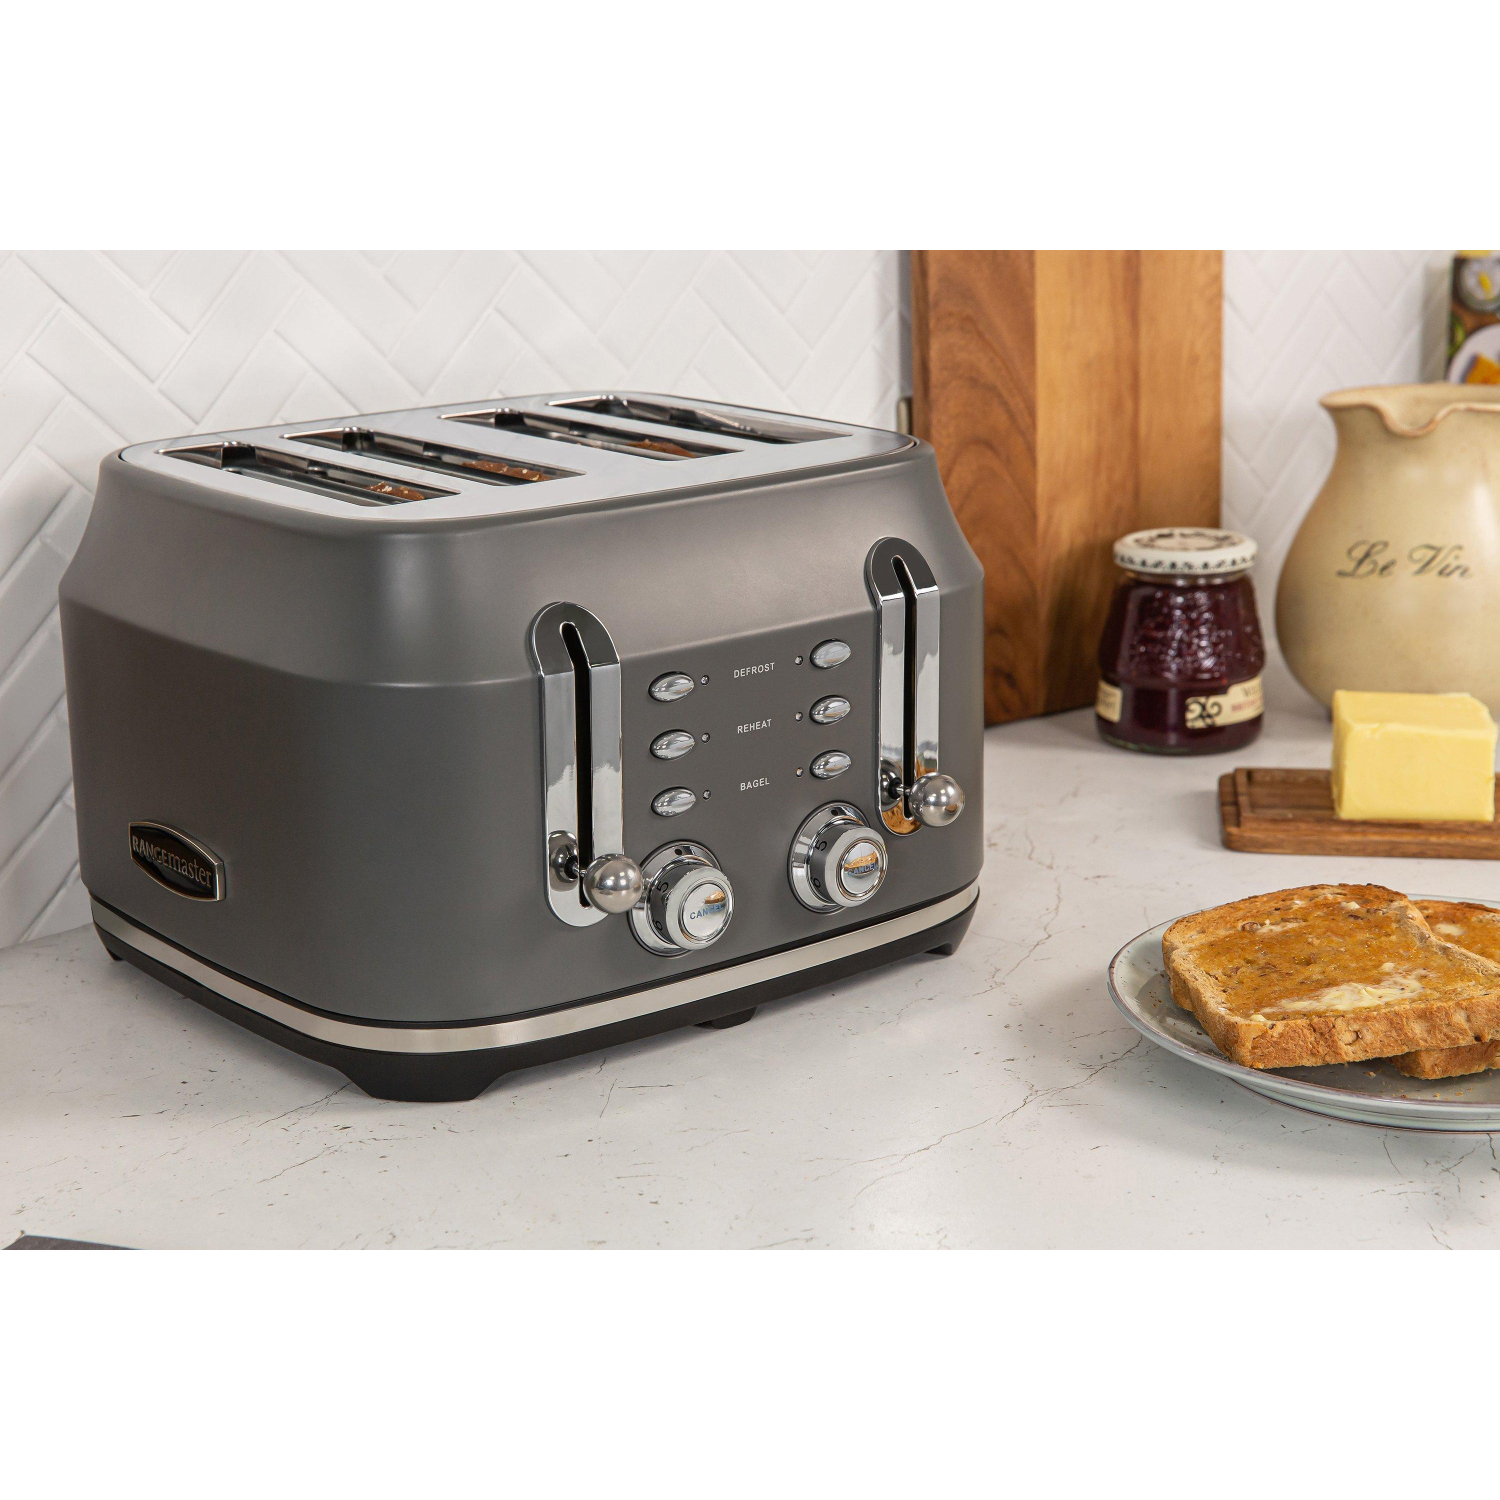 Rangemaster RMCL4S201GY 4 Slice Toaster - Matte Slate Grey - 3